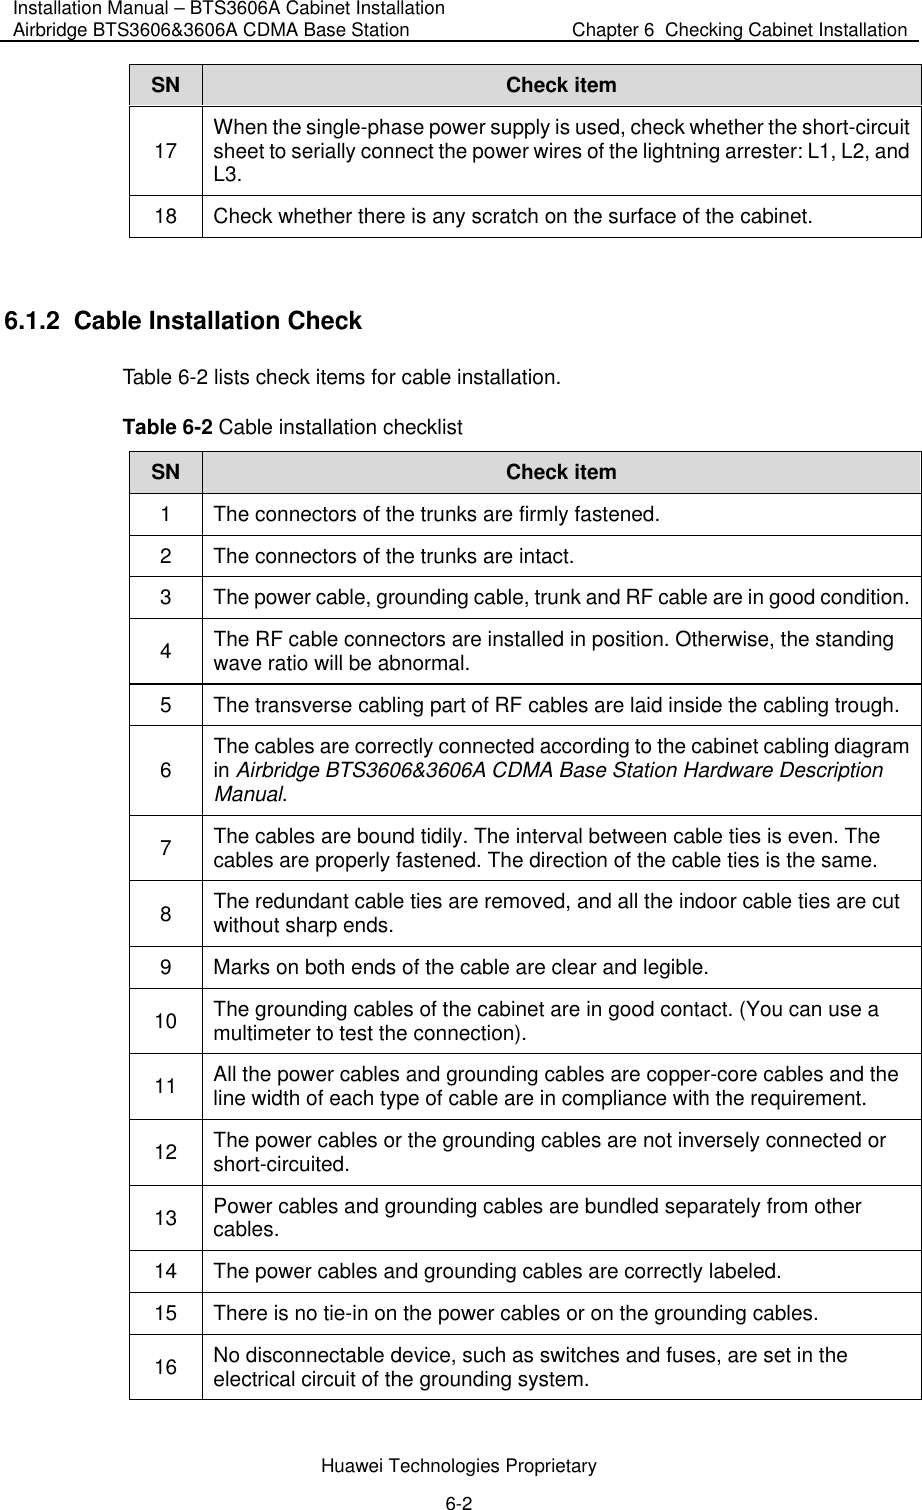 Installation Manual – BTS3606A Cabinet Installation Airbridge BTS3606&amp;3606A CDMA Base Station  Chapter 6  Checking Cabinet Installation  Huawei Technologies Proprietary 6-2 SN Check item 17  When the single-phase power supply is used, check whether the short-circuit sheet to serially connect the power wires of the lightning arrester: L1, L2, and L3. 18  Check whether there is any scratch on the surface of the cabinet.  6.1.2  Cable Installation Check Table 6-2 lists check items for cable installation. Table 6-2 Cable installation checklist SN Check item 1  The connectors of the trunks are firmly fastened. 2  The connectors of the trunks are intact.  3  The power cable, grounding cable, trunk and RF cable are in good condition.  4  The RF cable connectors are installed in position. Otherwise, the standing wave ratio will be abnormal.  5  The transverse cabling part of RF cables are laid inside the cabling trough.  6  The cables are correctly connected according to the cabinet cabling diagram in Airbridge BTS3606&amp;3606A CDMA Base Station Hardware Description Manual. 7  The cables are bound tidily. The interval between cable ties is even. The cables are properly fastened. The direction of the cable ties is the same.  8  The redundant cable ties are removed, and all the indoor cable ties are cut without sharp ends.  9  Marks on both ends of the cable are clear and legible. 10  The grounding cables of the cabinet are in good contact. (You can use a multimeter to test the connection).  11  All the power cables and grounding cables are copper-core cables and the line width of each type of cable are in compliance with the requirement.  12  The power cables or the grounding cables are not inversely connected or short-circuited. 13  Power cables and grounding cables are bundled separately from other cables. 14  The power cables and grounding cables are correctly labeled.  15  There is no tie-in on the power cables or on the grounding cables.  16  No disconnectable device, such as switches and fuses, are set in the electrical circuit of the grounding system.  